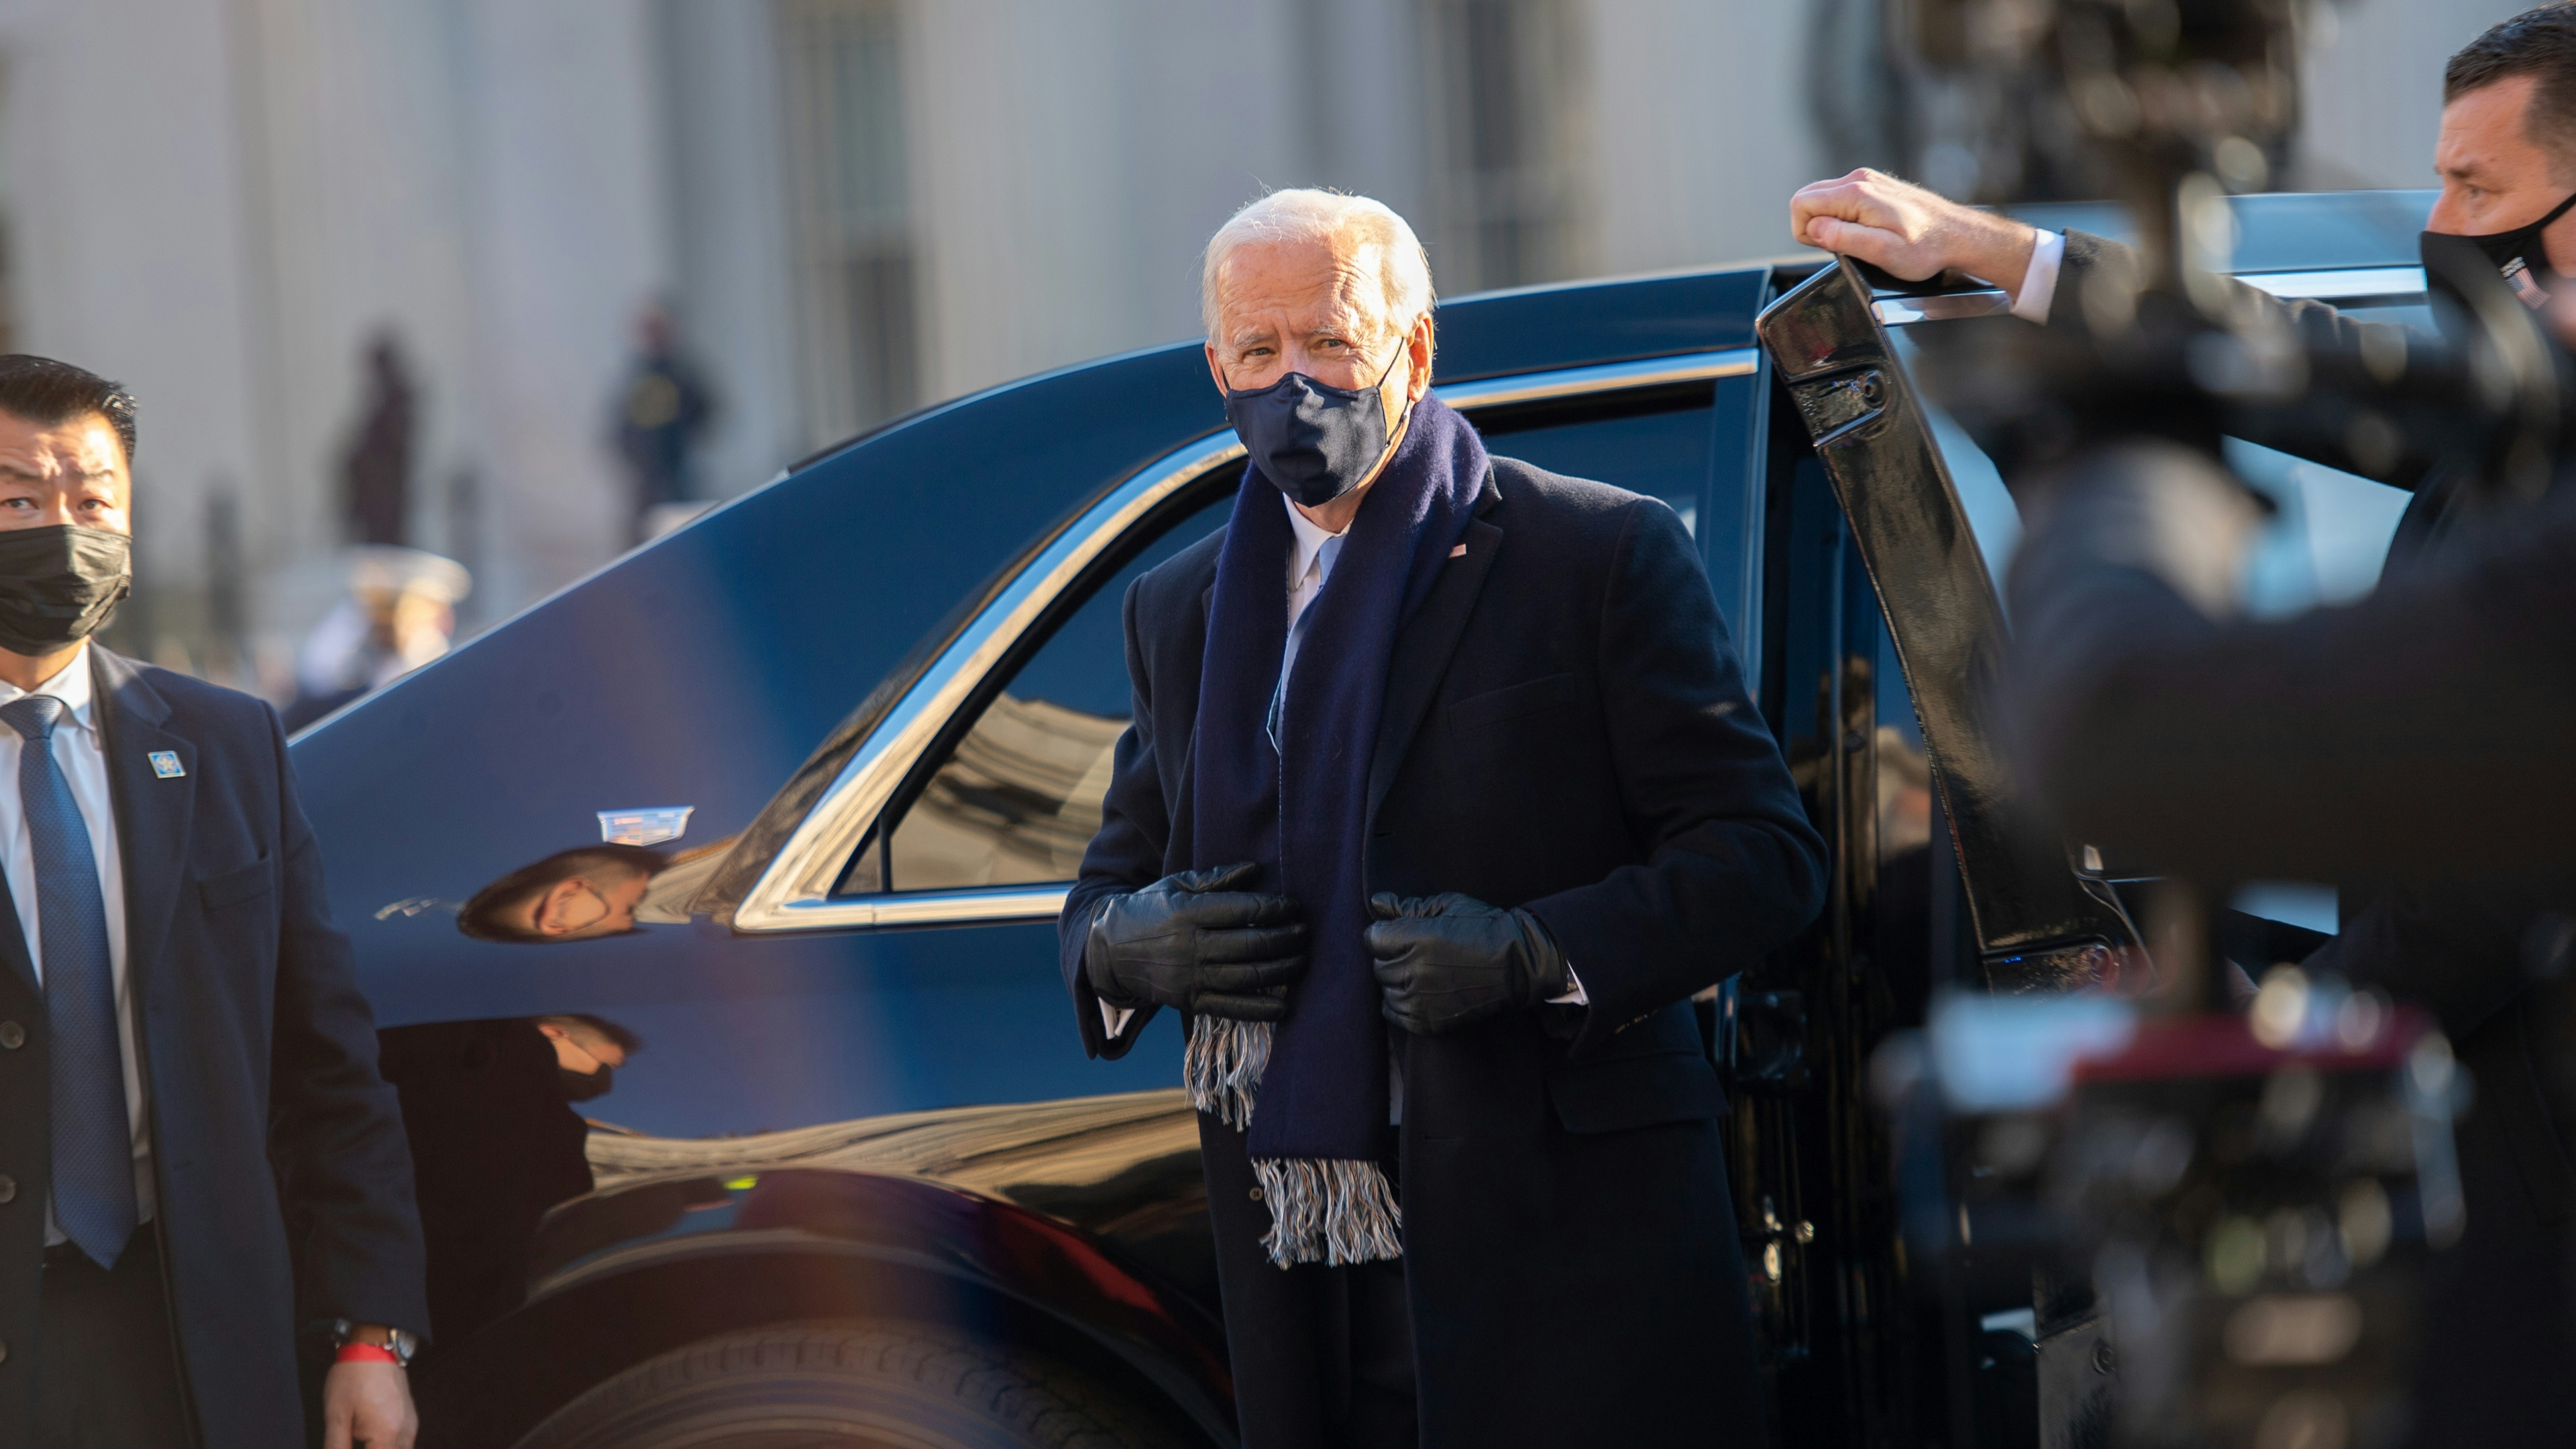 U.S. President Joe Biden prepares to walk the abbreviated parade route in front of the White House after Biden's inauguration on January 20, 2021.